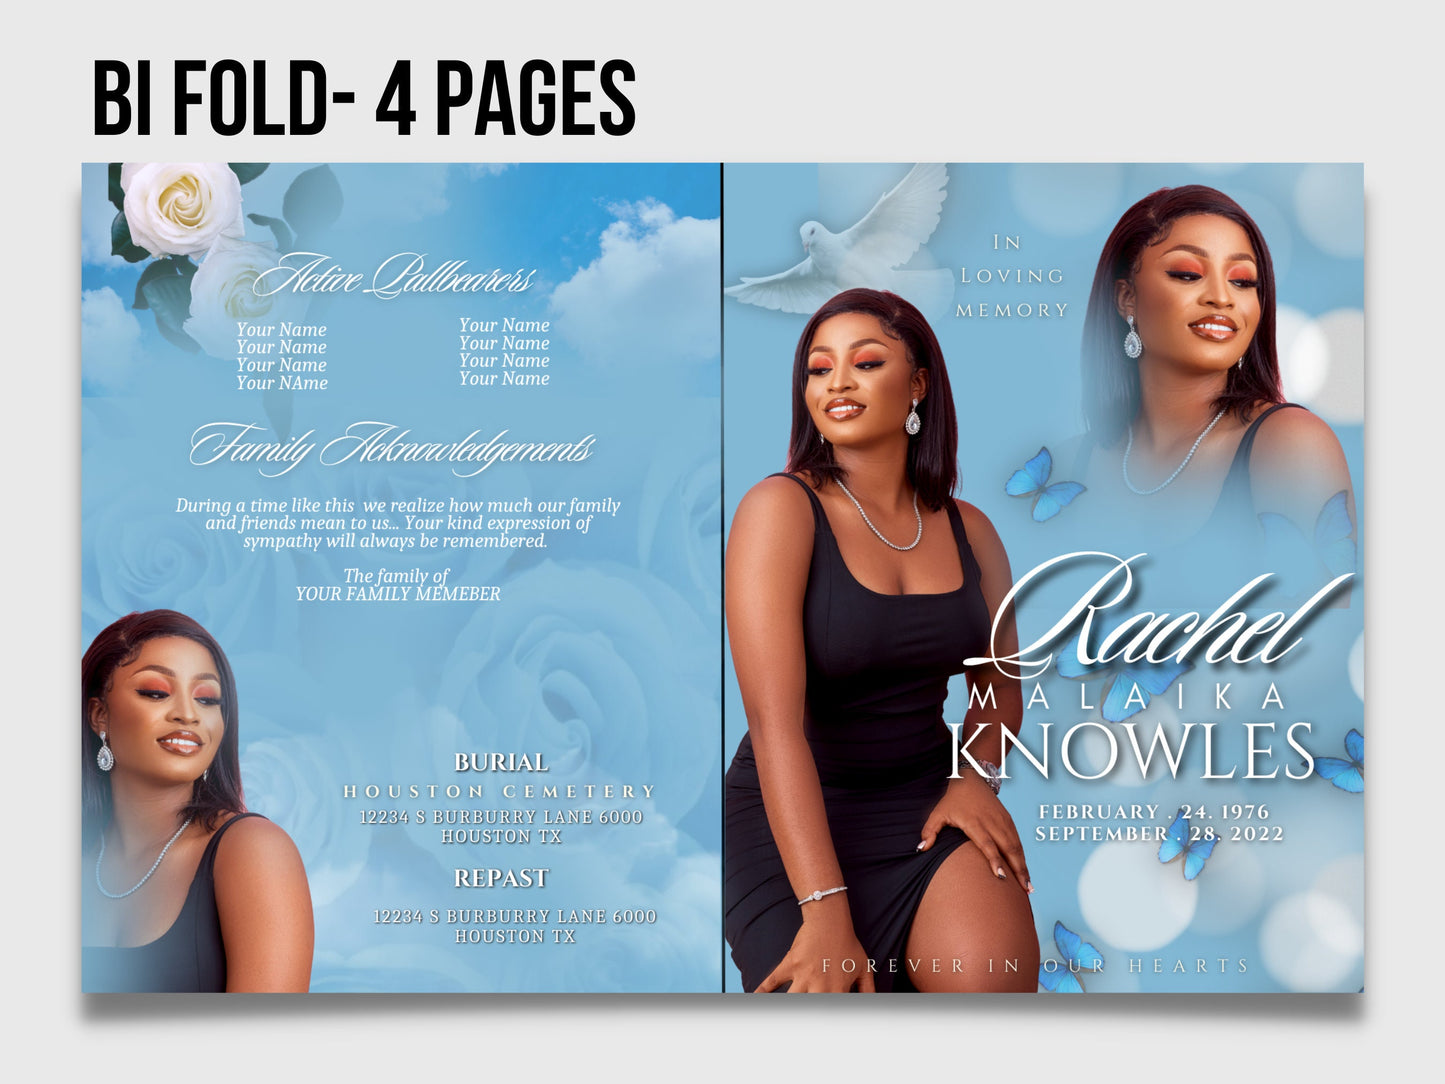 8.5"x 11" FUNERAL OBITUARY TEMPLATE (4 pages) |Elegant Style Funeral Program | Celebration of Life |Women Blue Rose Obituary |Canva Template